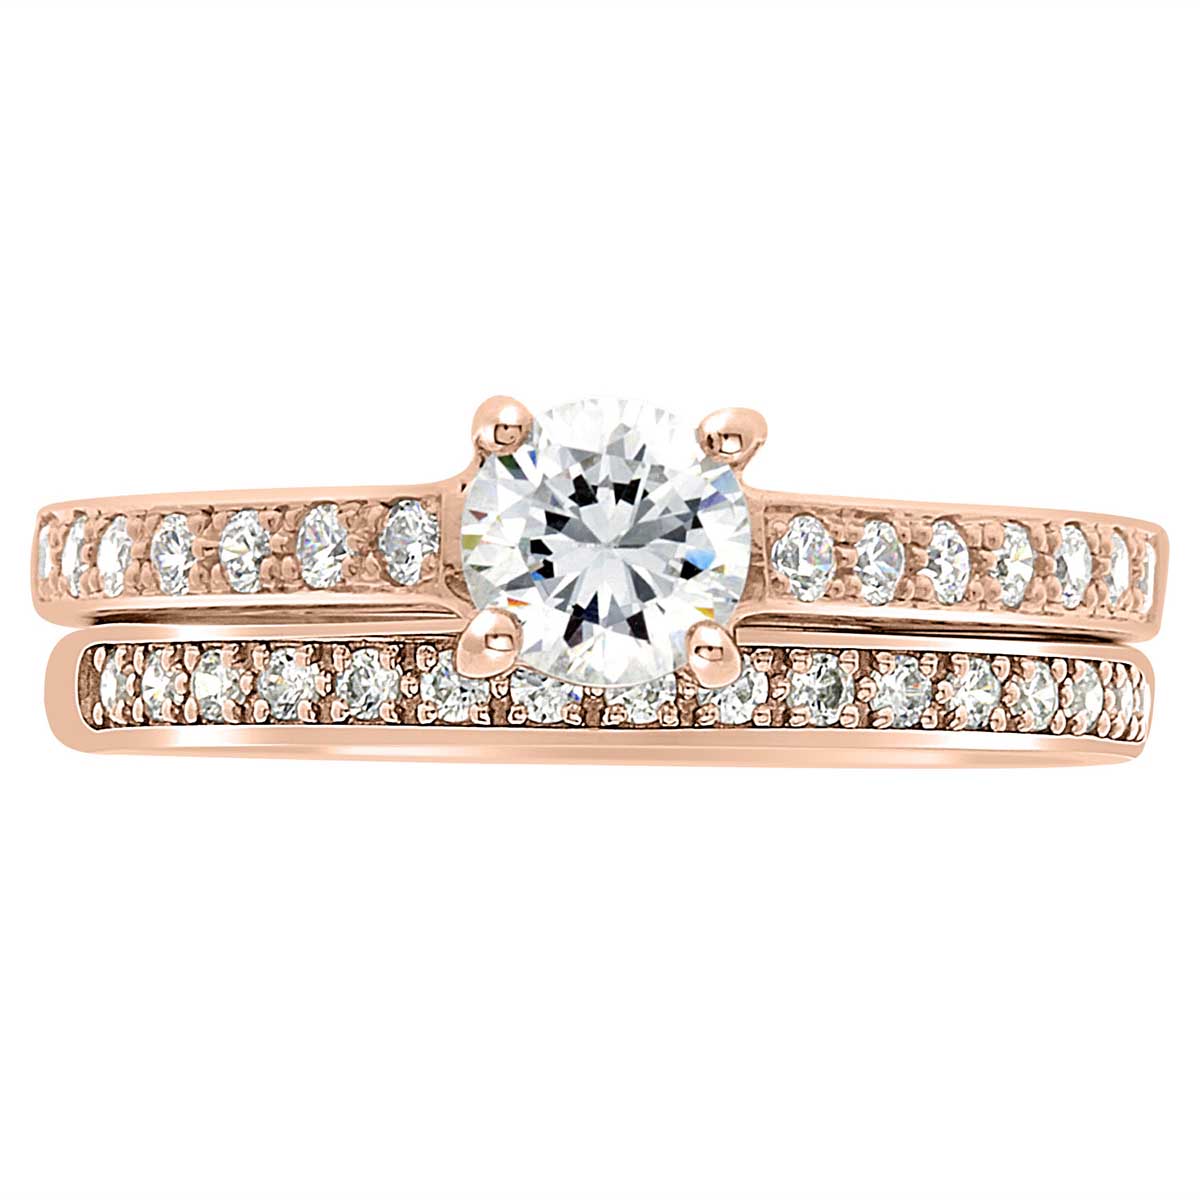 Pavé Diamond Ring manufactured in rose gold  pictured with a diamond set wedding ring